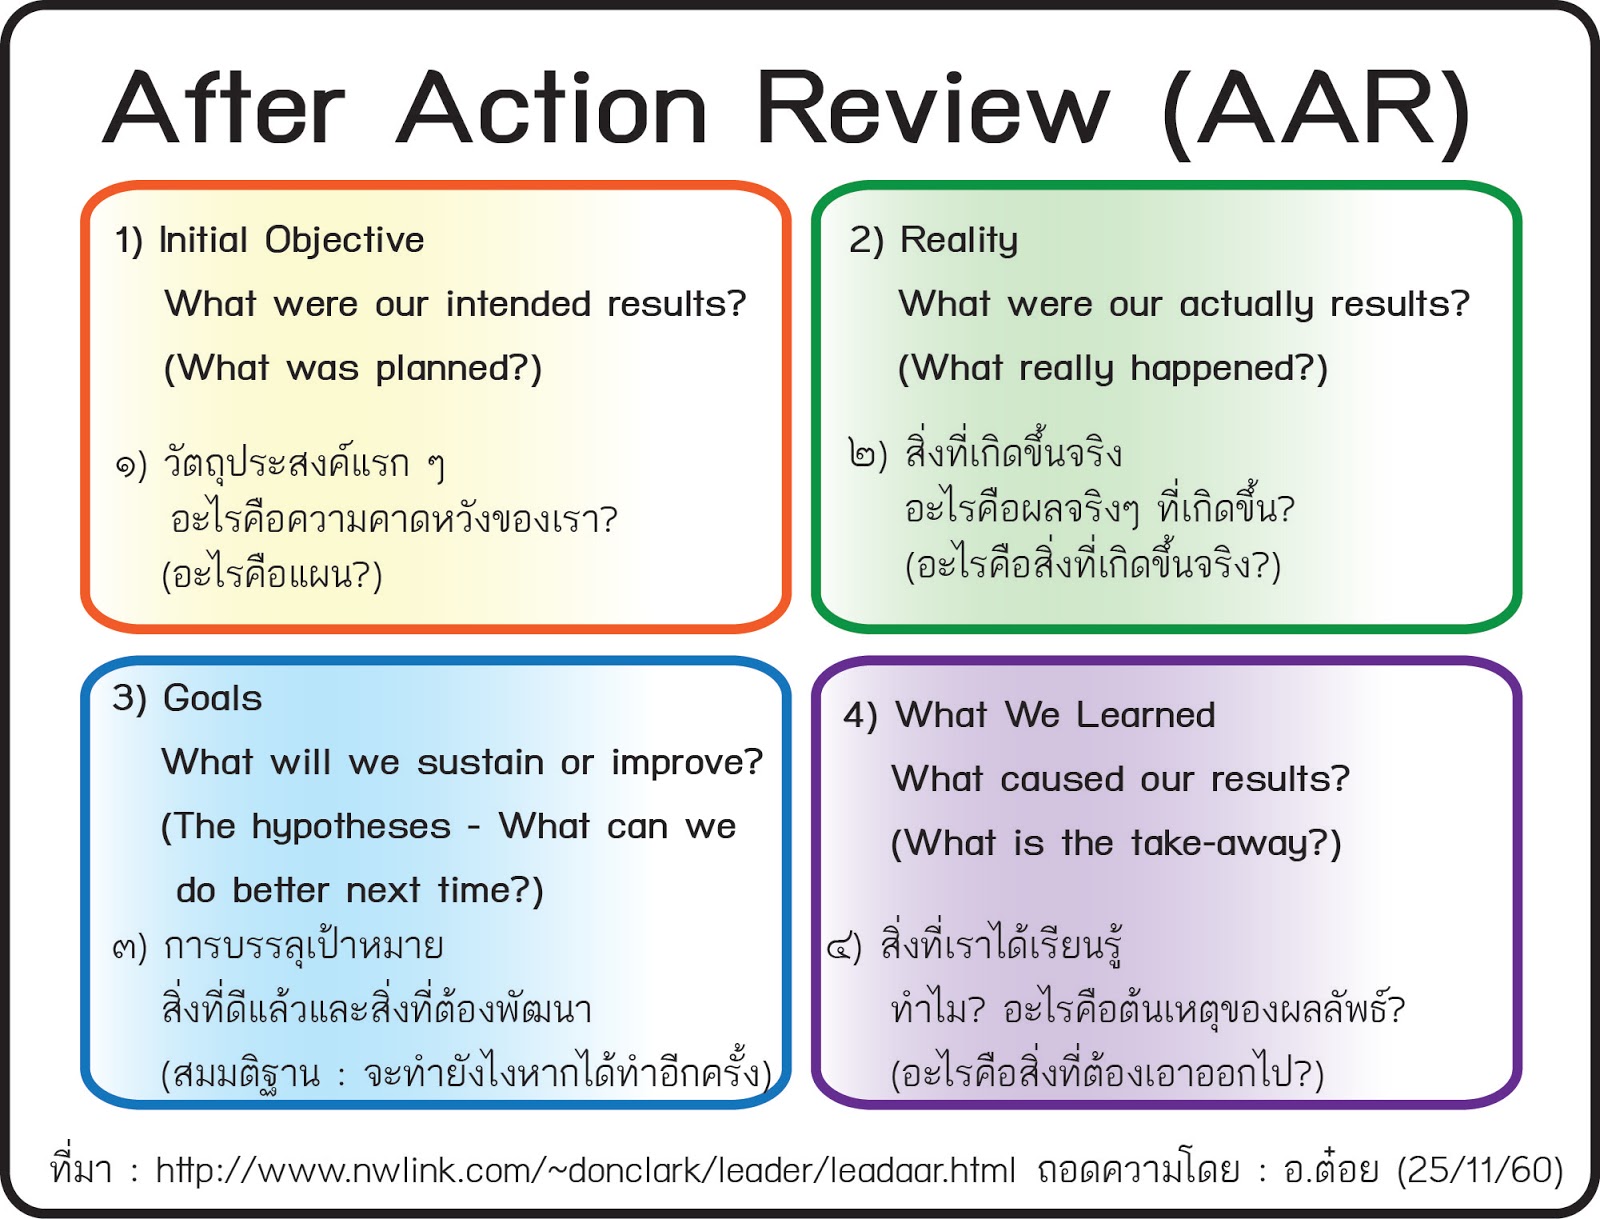 After примеры. After Action Review. Структура after Action Review. На русском after Action Review. After Action Review example.